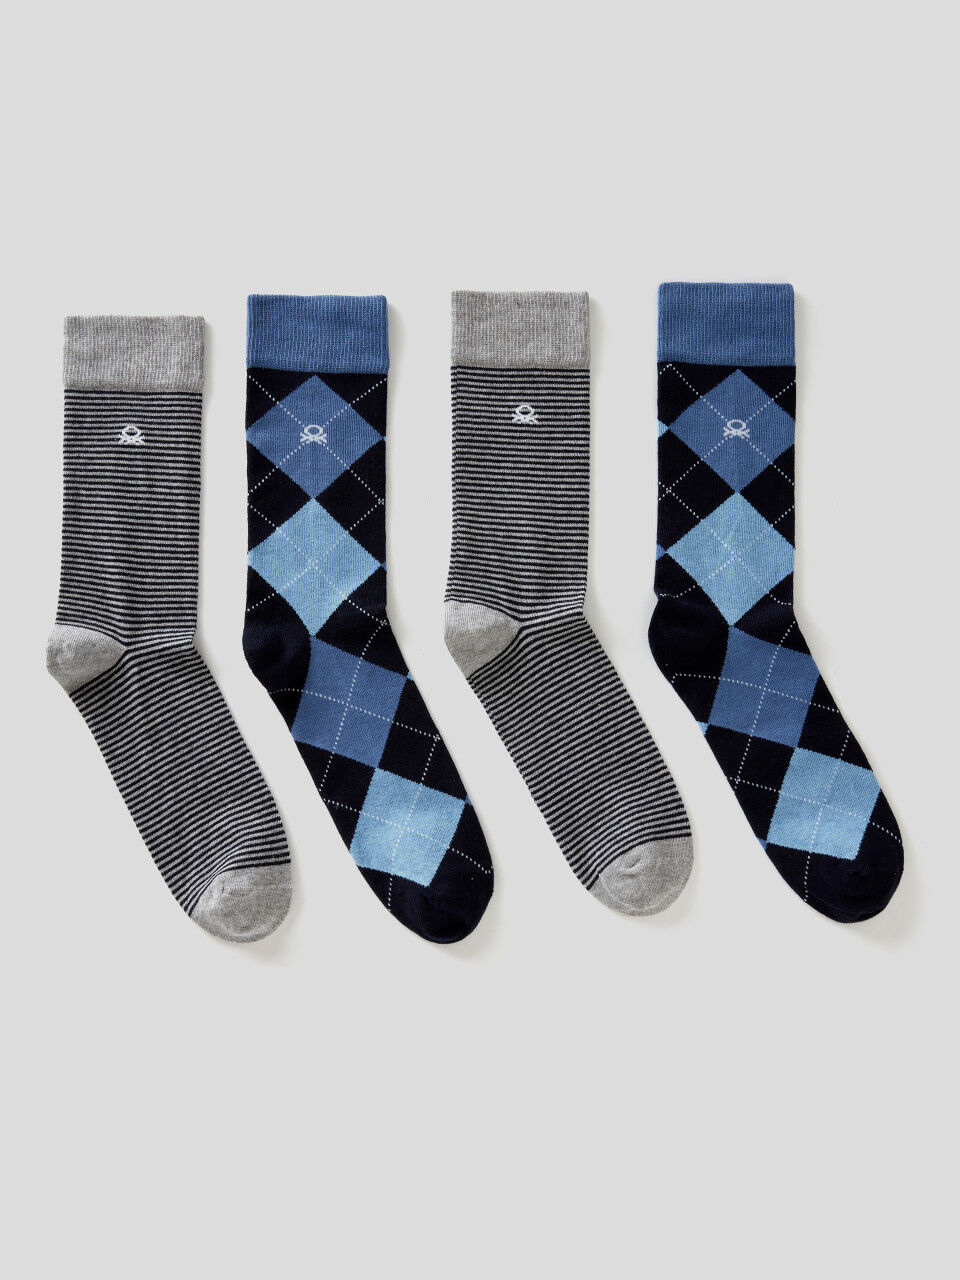 Two pairs of socks with jacquard pattern